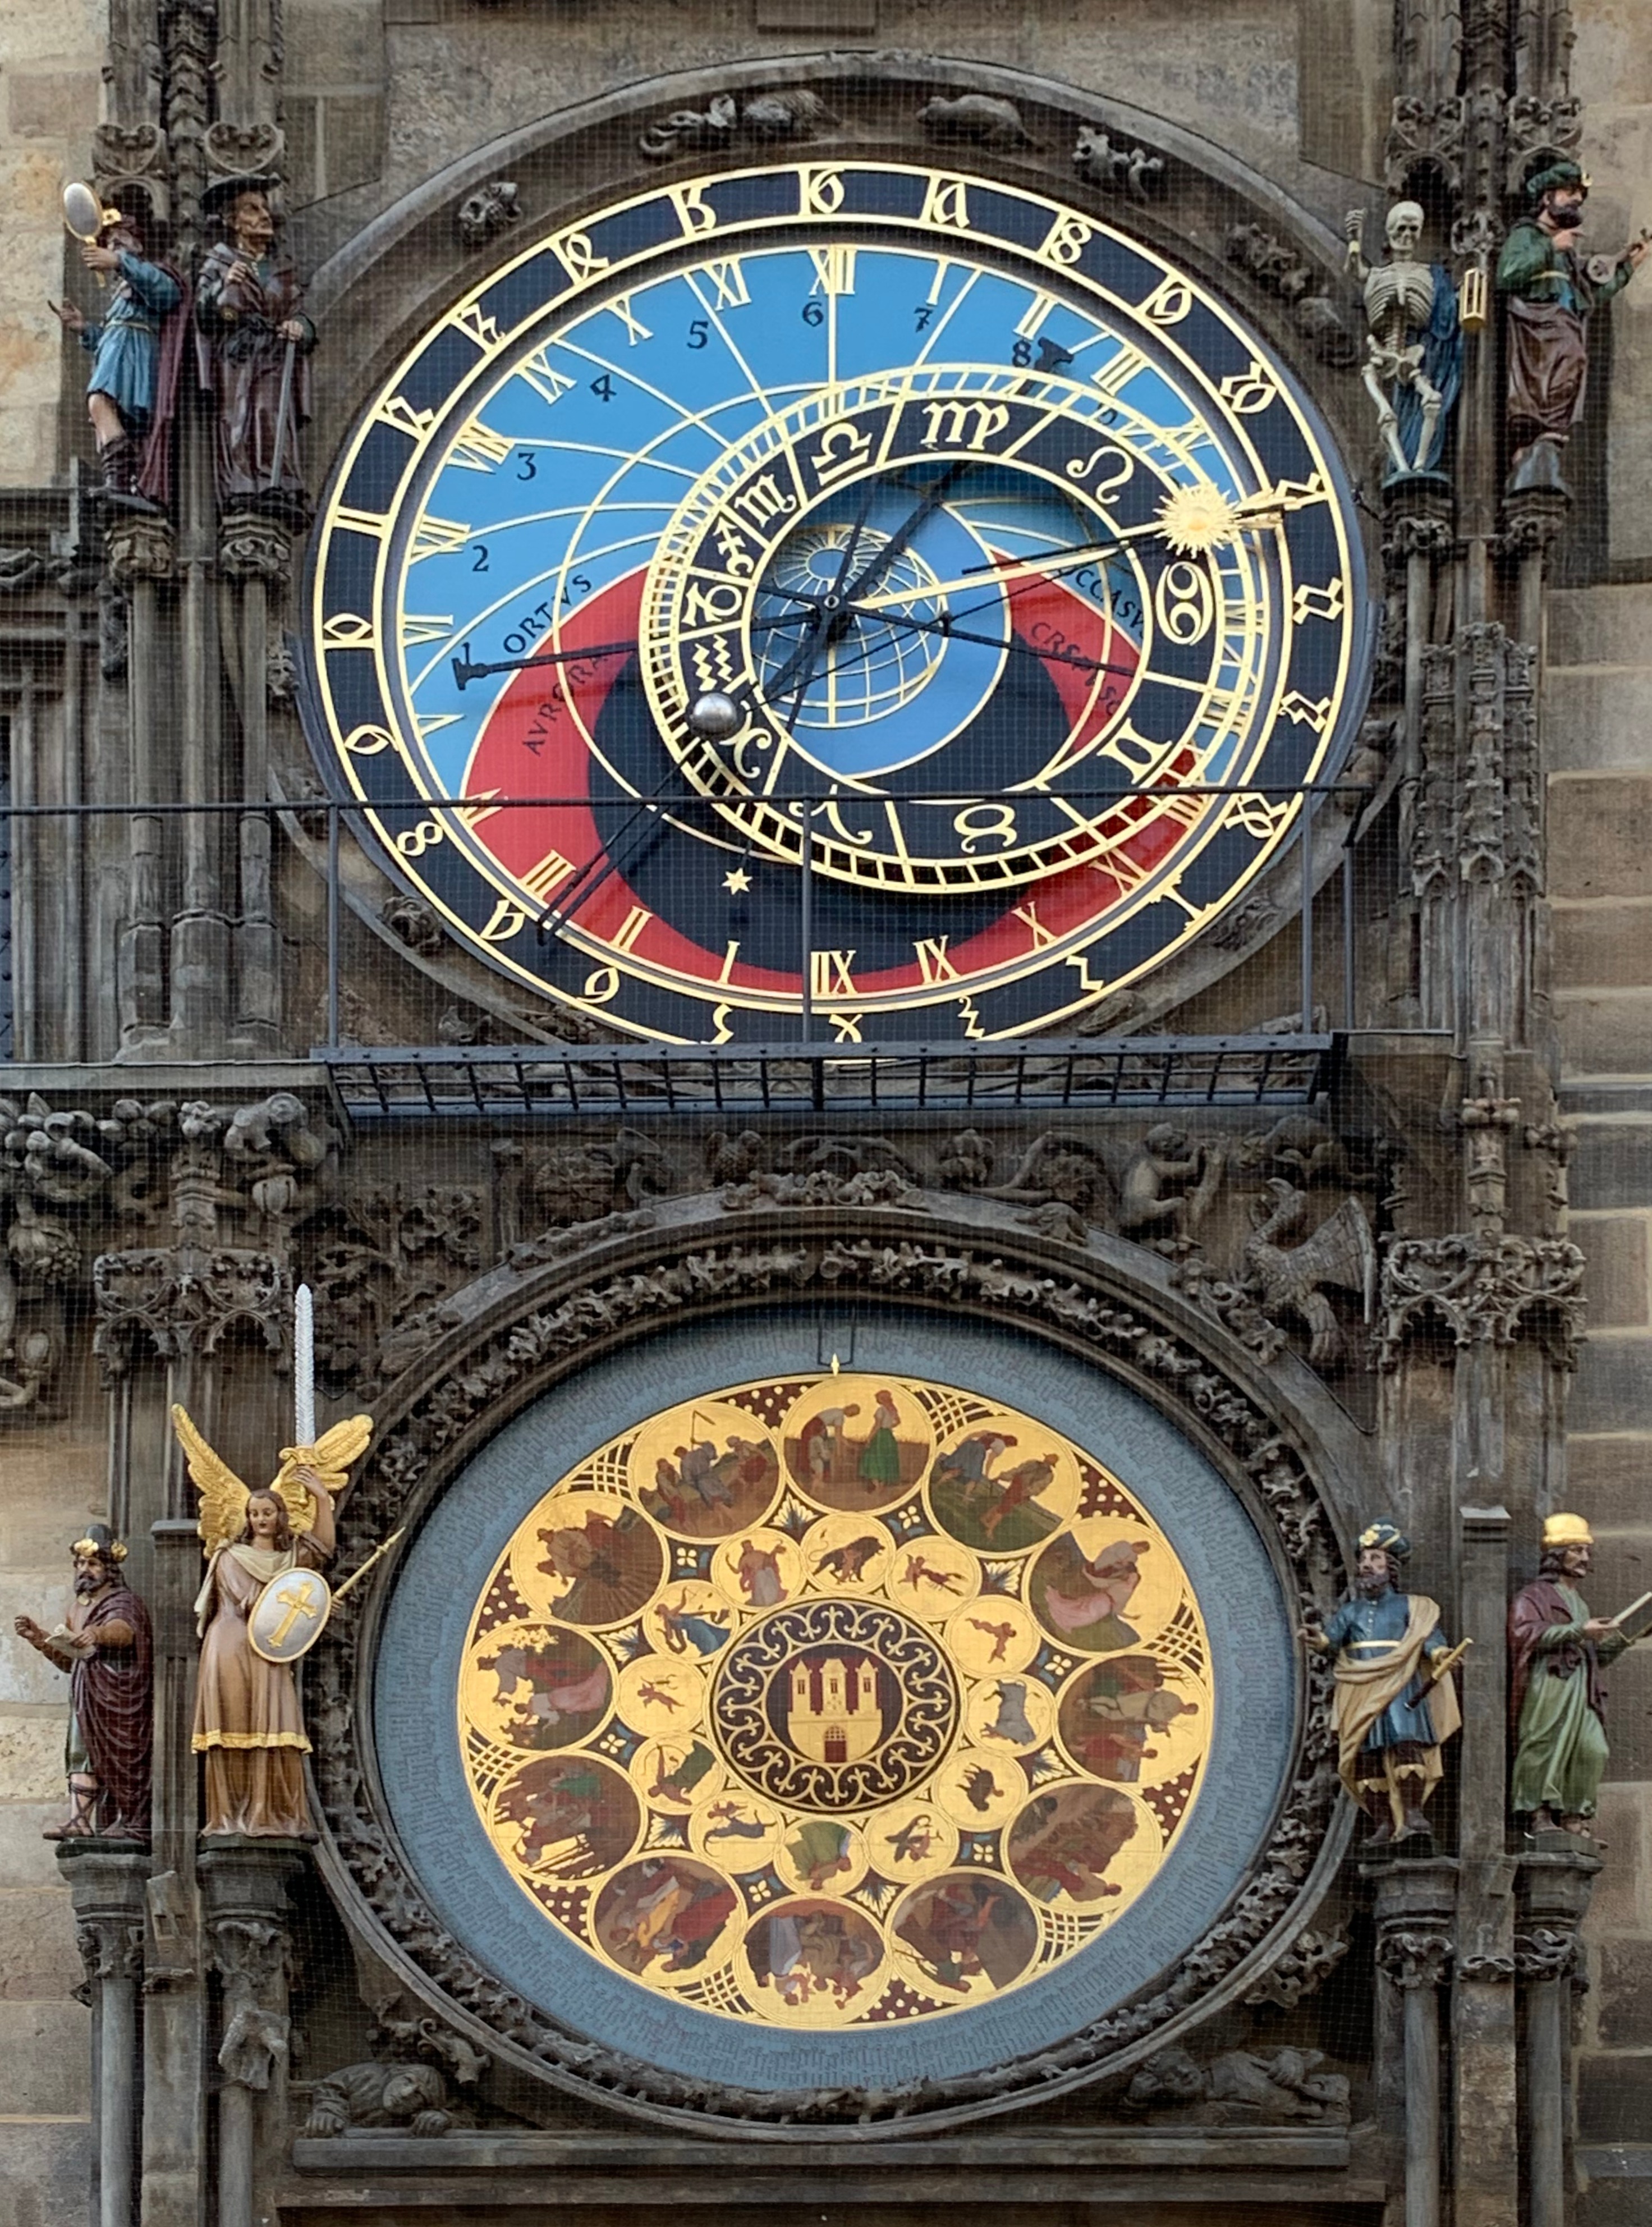 The Prague astronomical clock. Credit: Wikimedia Commons.